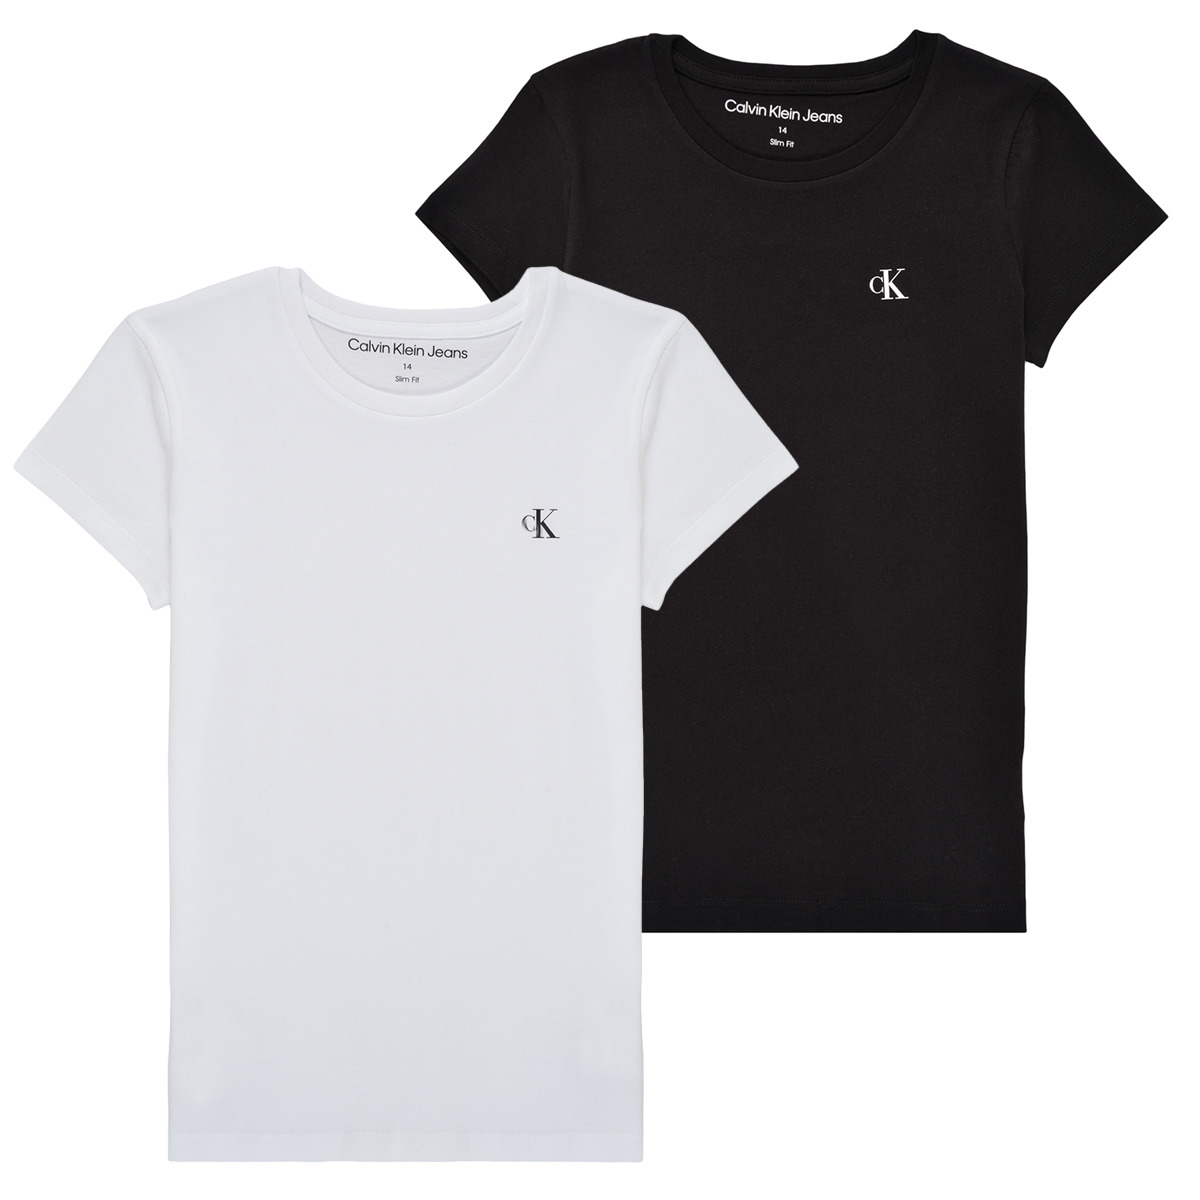 Calvin Klein Jeans 2-PACK SLIM MONOGRAM TOP Multicolour - Free delivery |  Spartoo NET ! - Clothing short-sleeved t-shirts Child